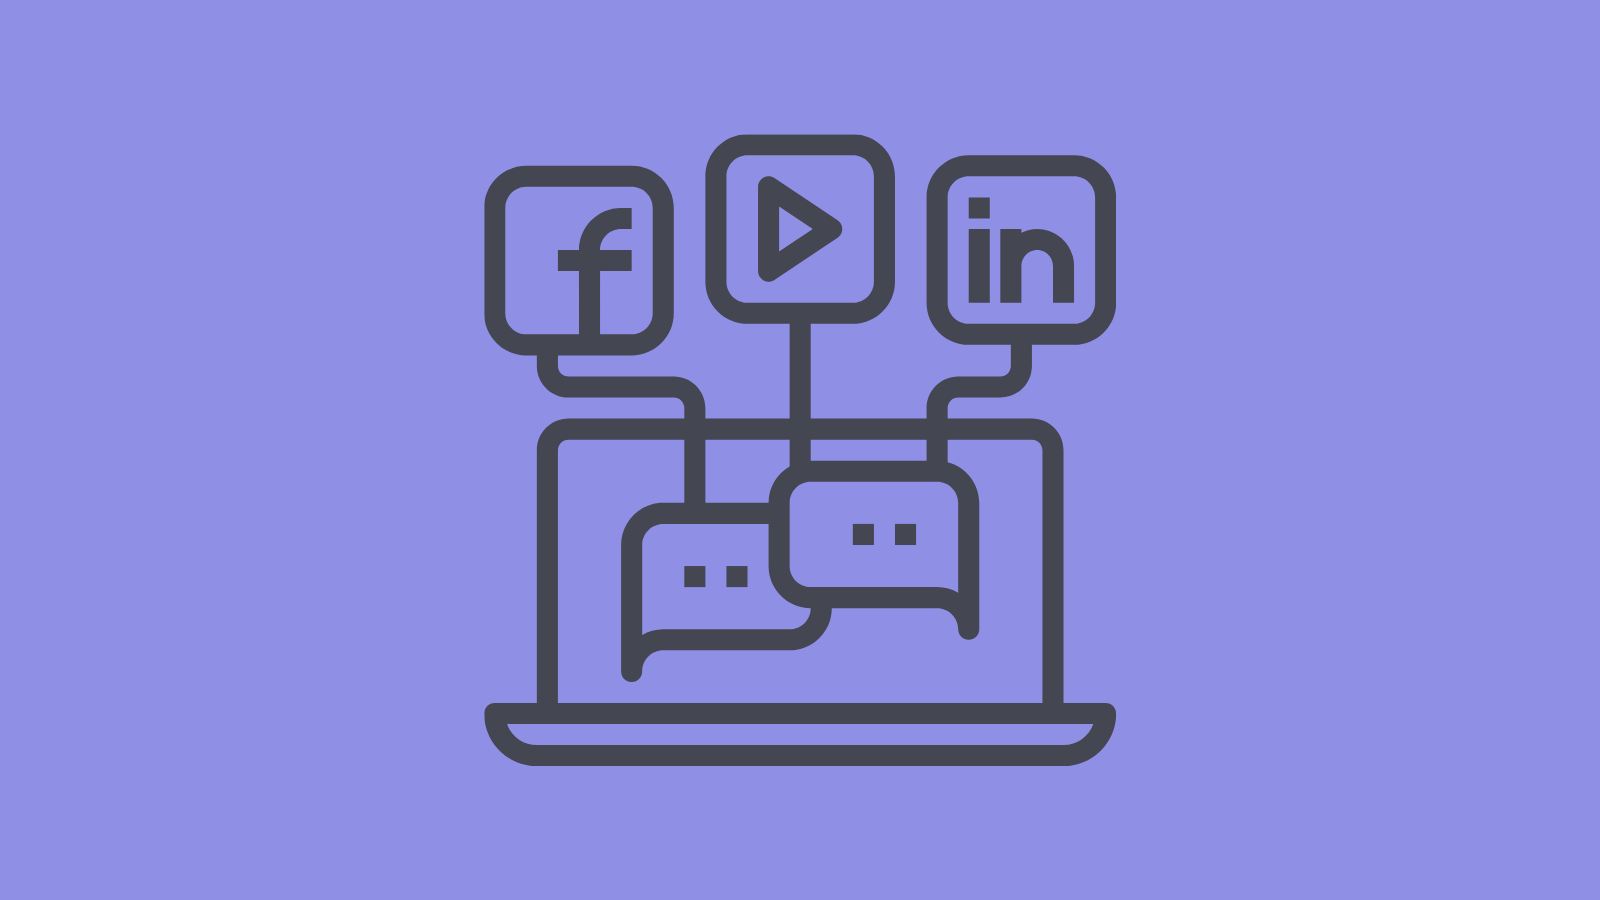 A minimalist drawing of a laptop with Facebook, LinkedIn, and YouTube icons,